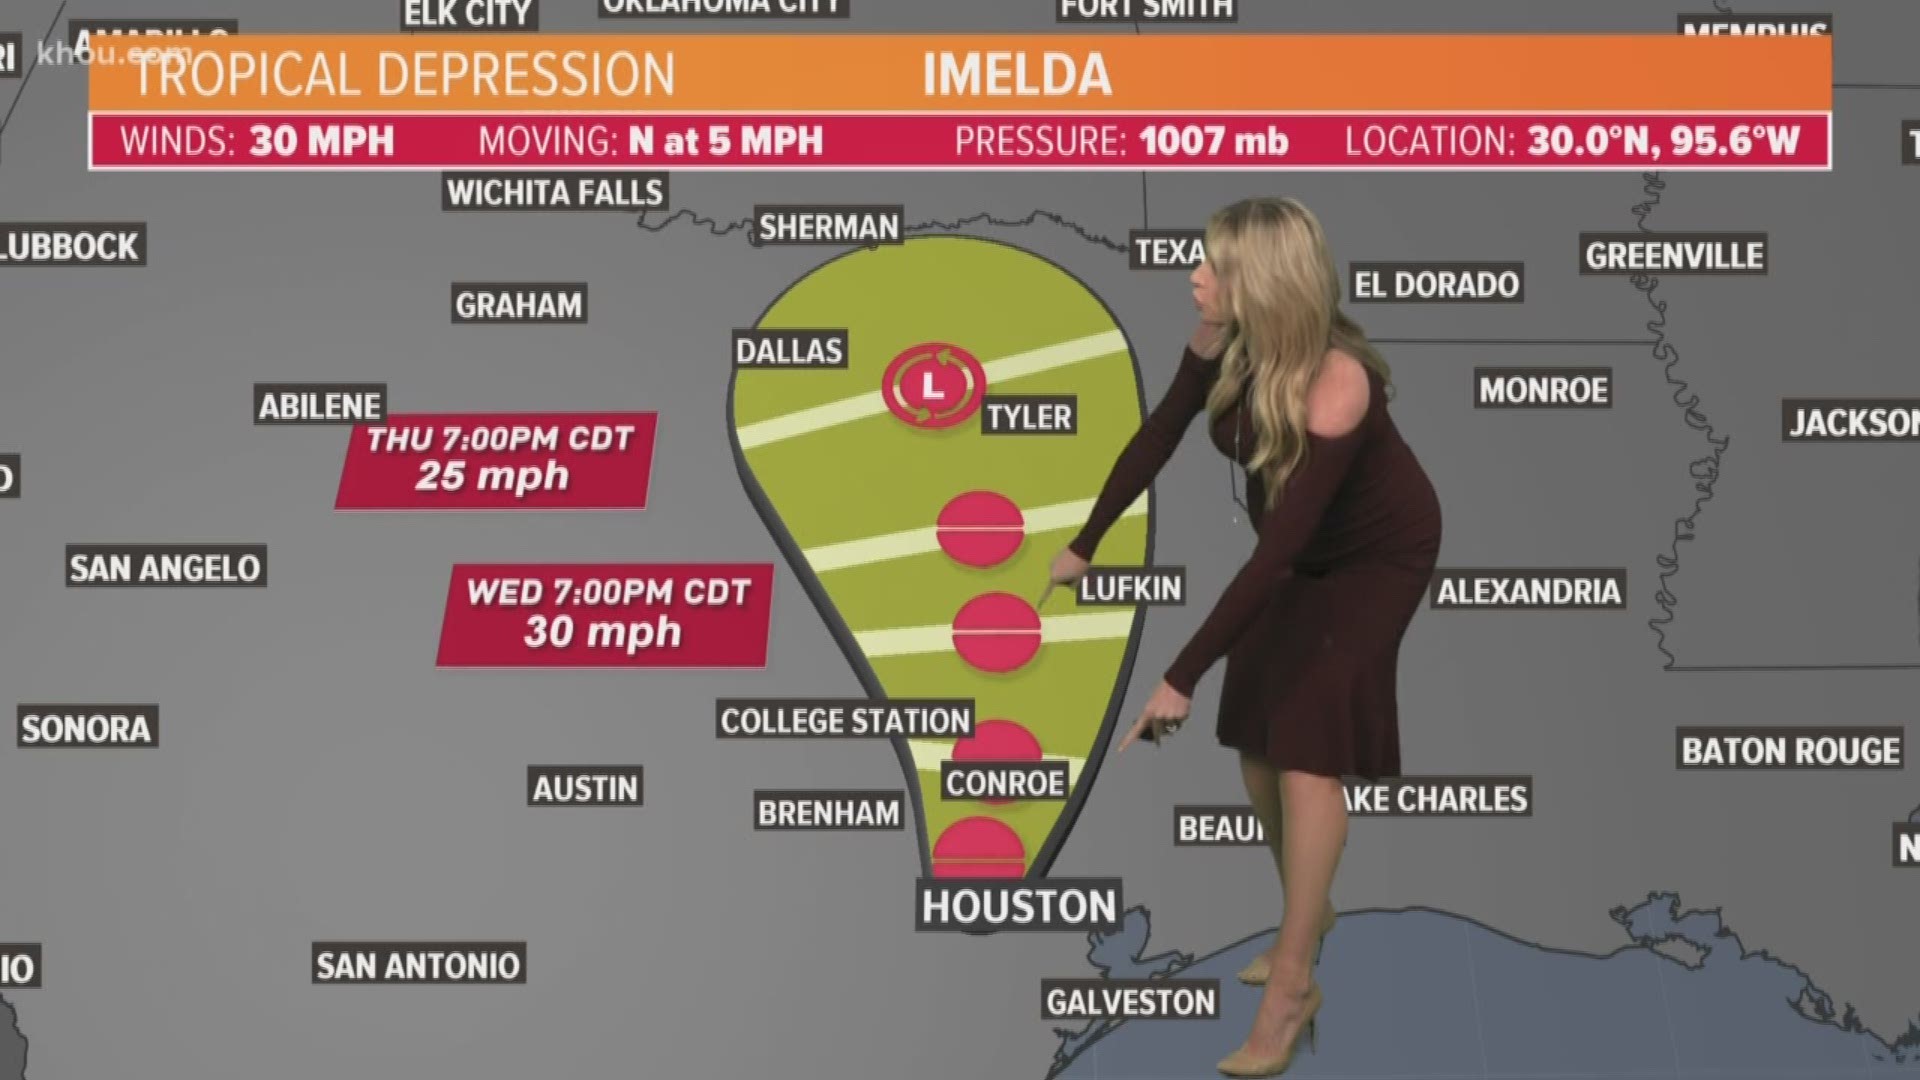 KHOU 11 Meteorologist Chita Craft has this 6 a.m. update on Sept. 18, 2019. Tropical Depression Imedla is moving inland.